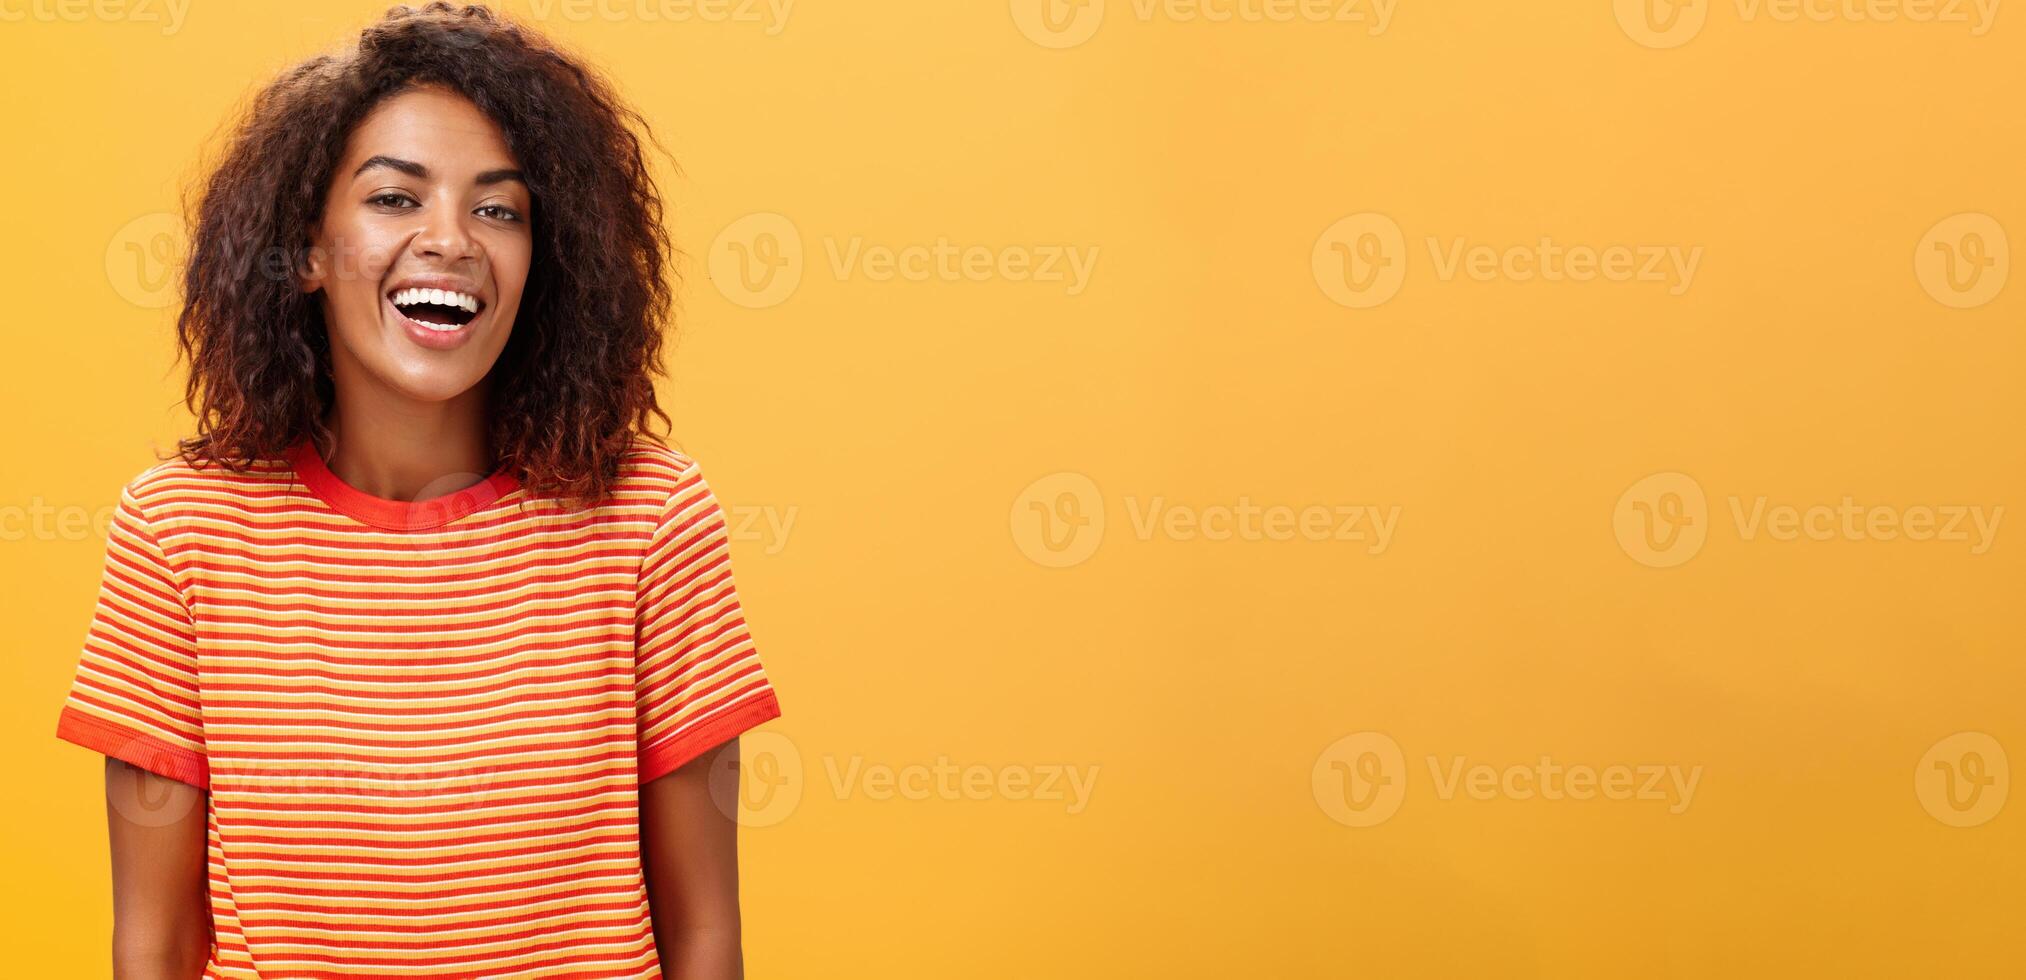 Waist-up shot of outgoing happy charming dark-skinned female with curly hairstyle laughing joyfully posing in striped trendy t-shirt over orange background enjoying nice casual conversation photo